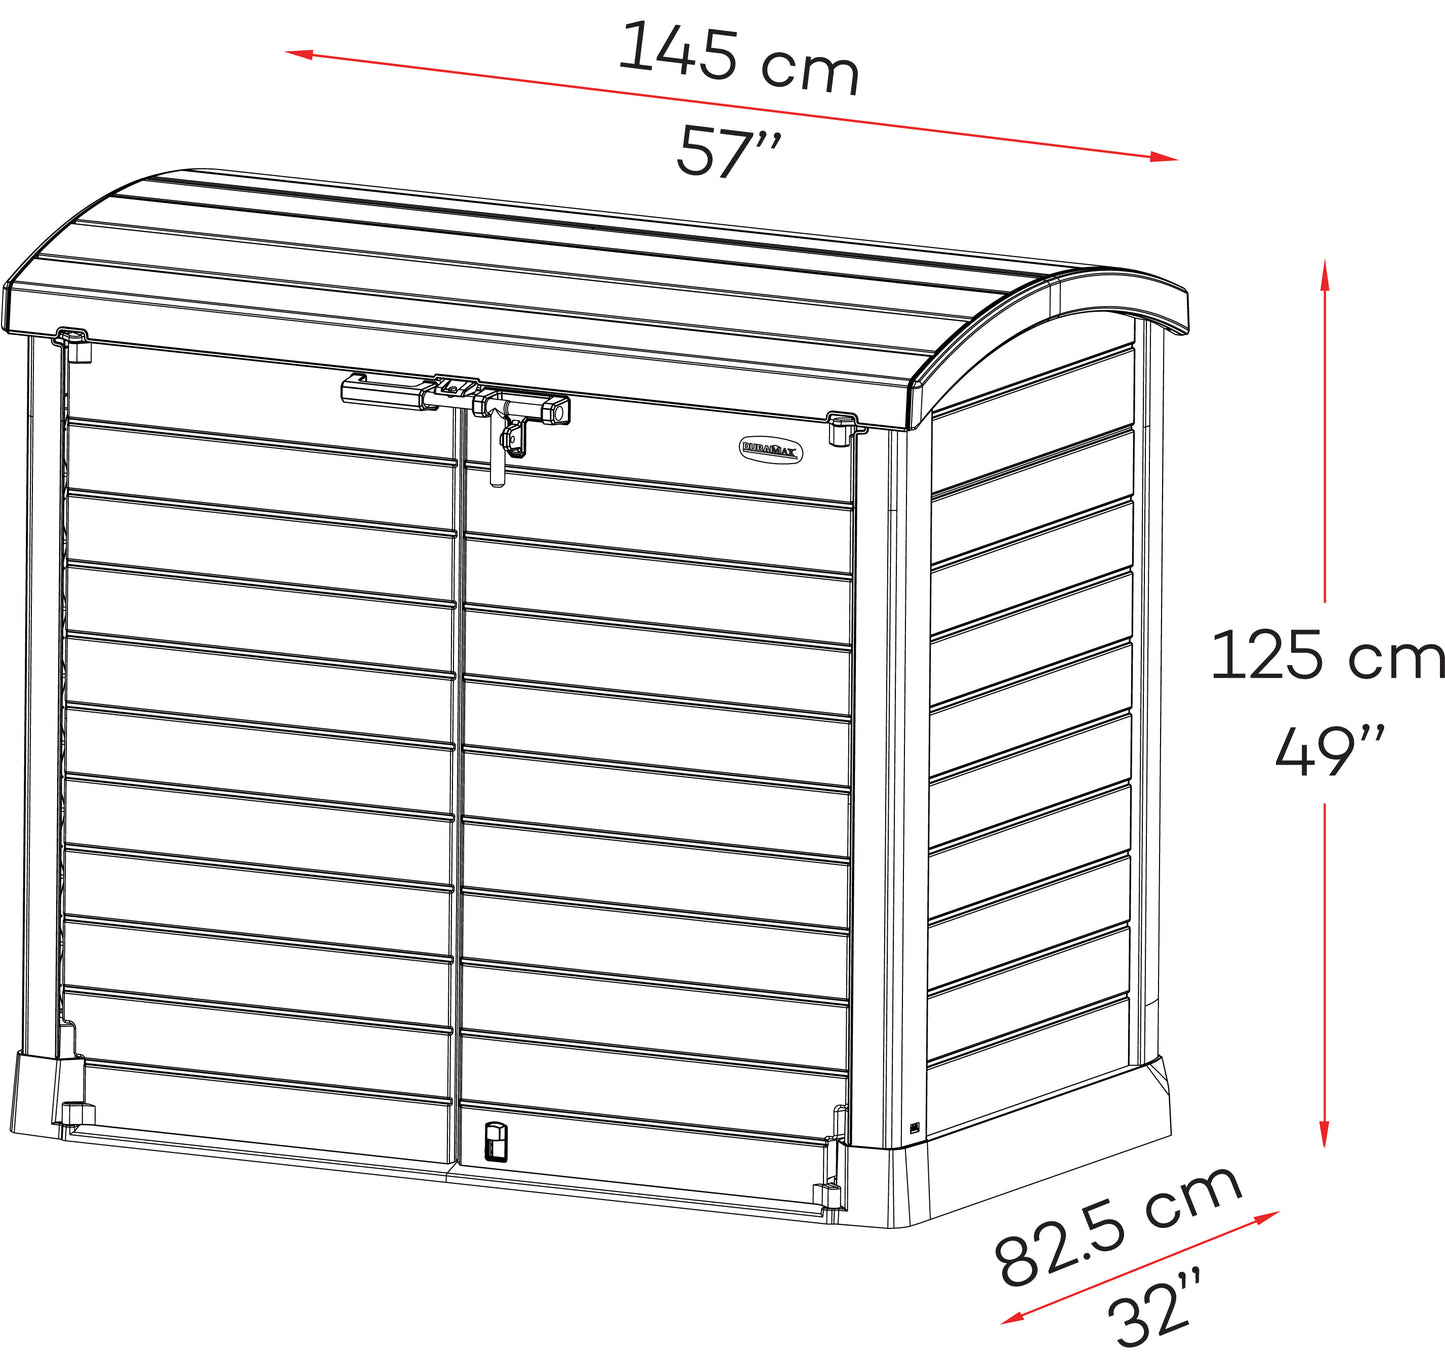 Duramax garbage container dimensions, 1.45 x 1.25.